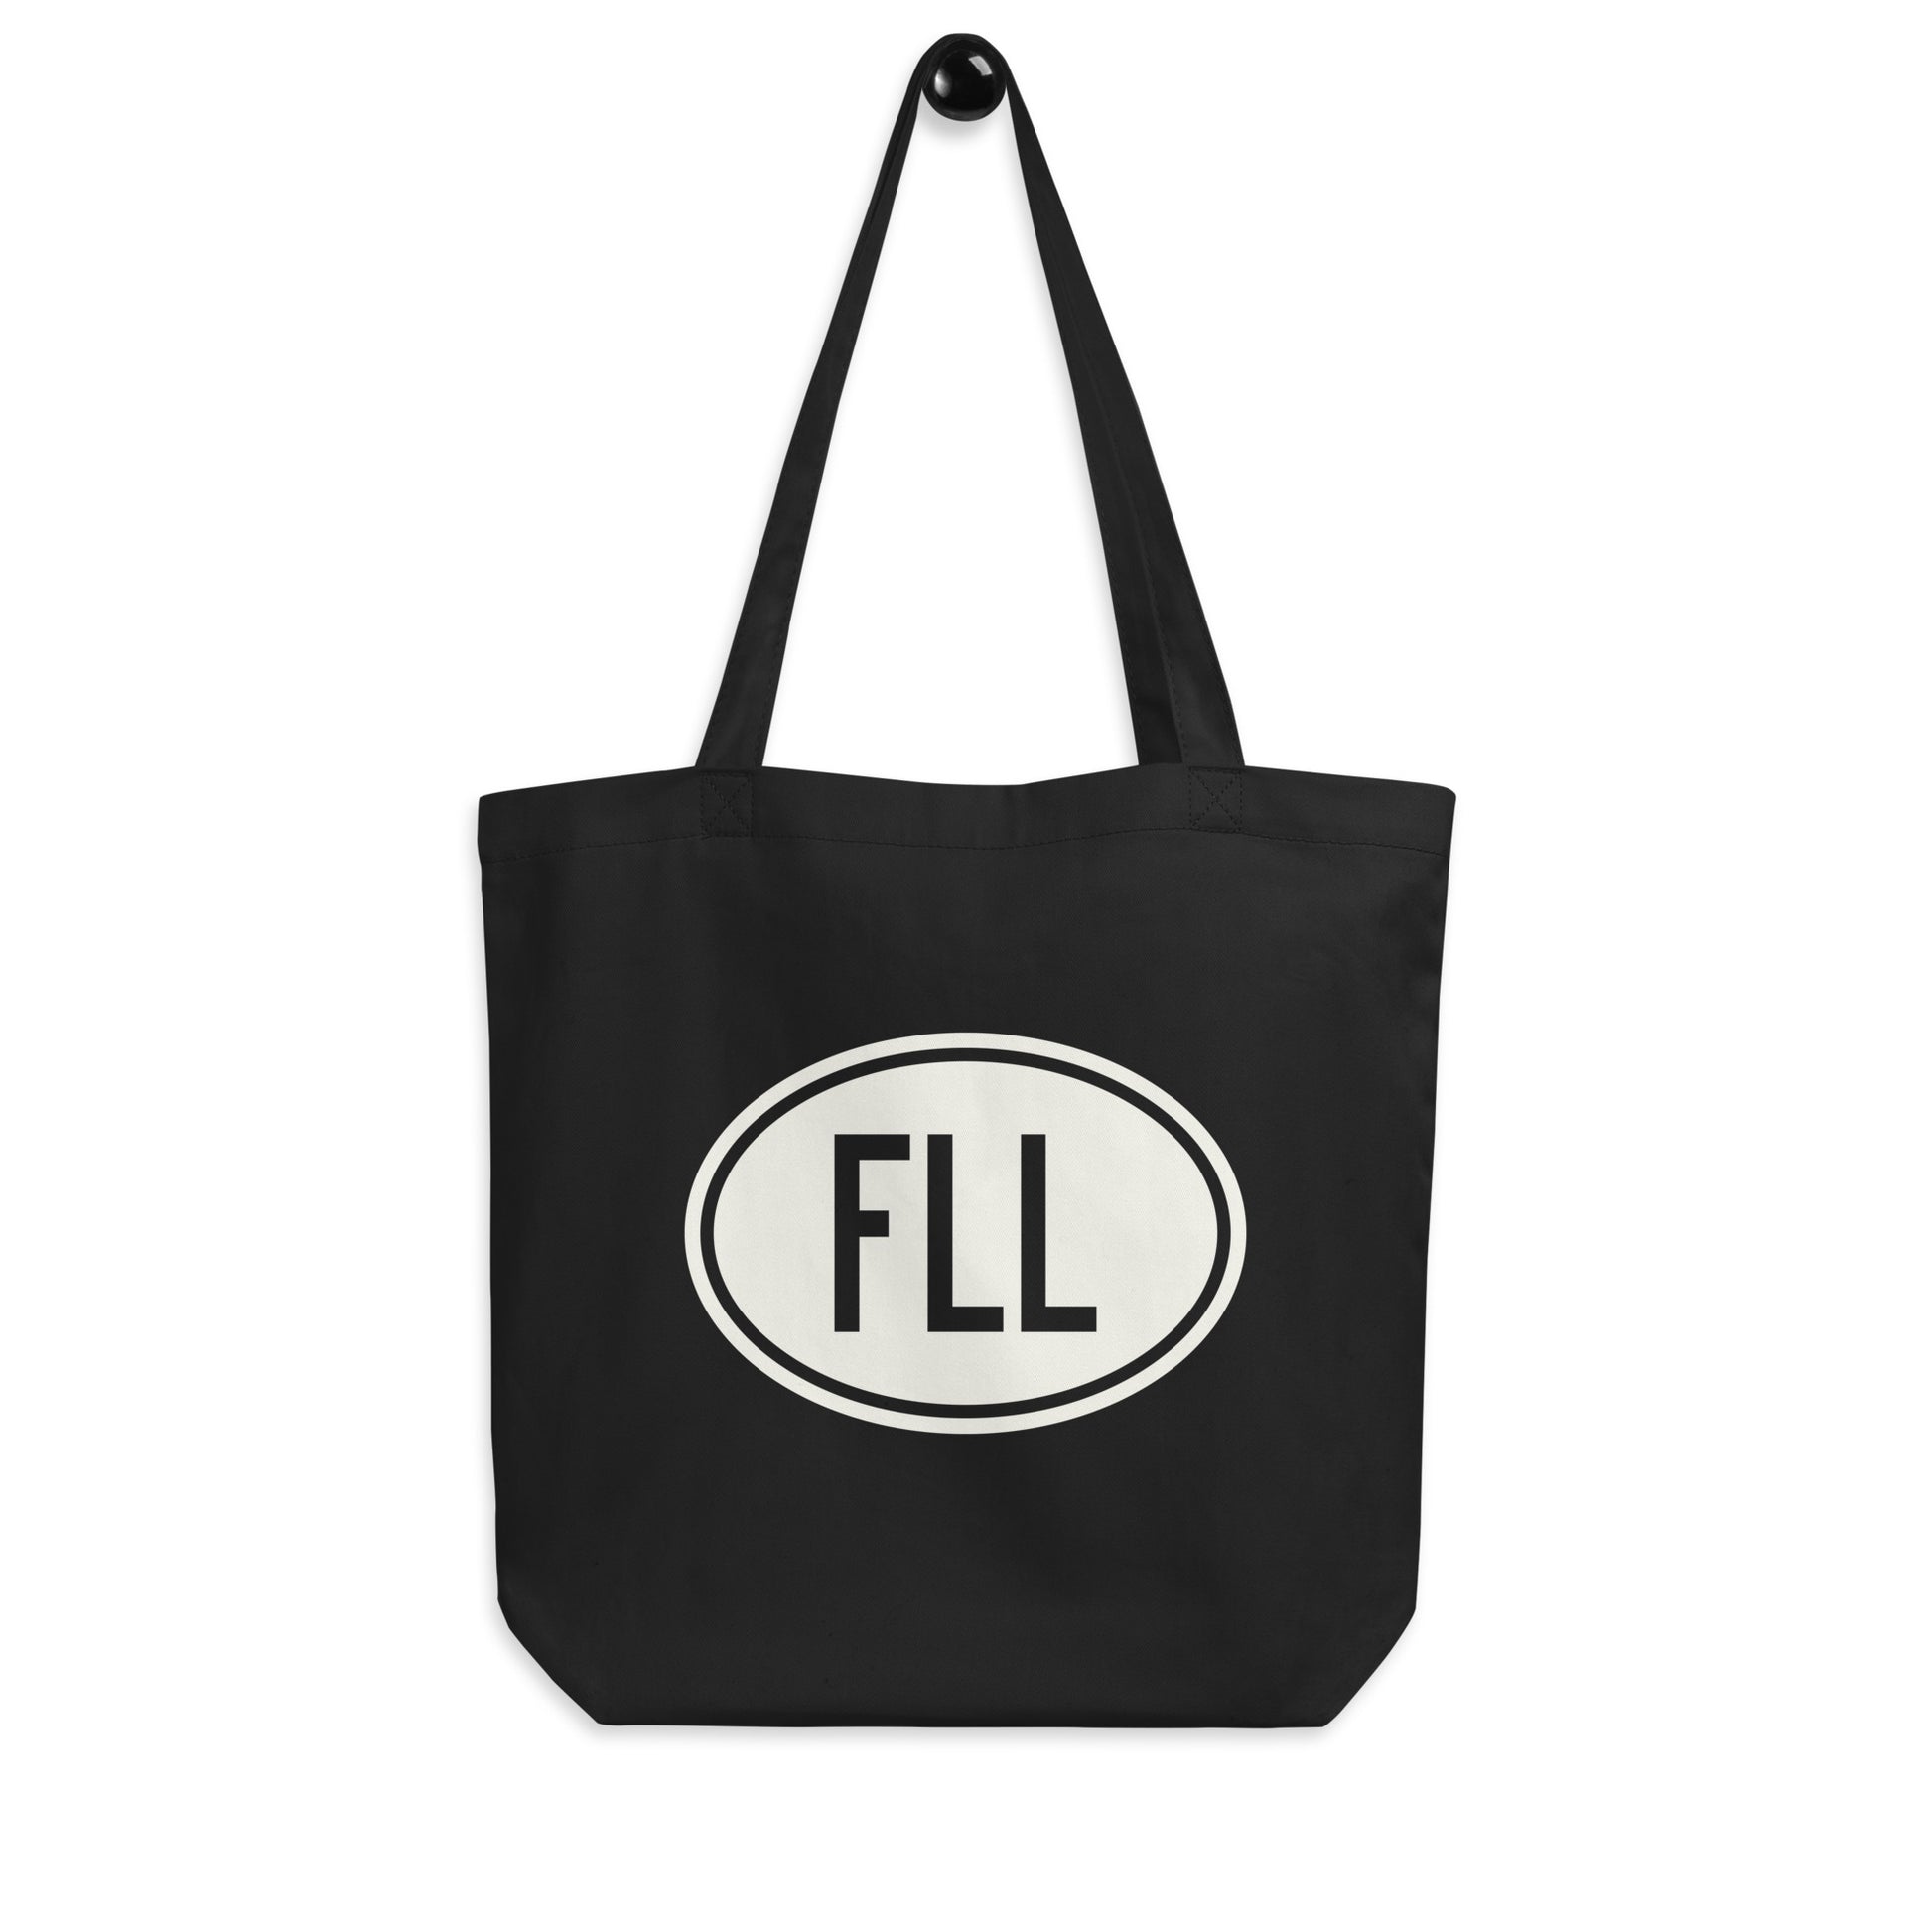 Unique Travel Gift Organic Tote - White Oval • FLL Fort Lauderdale • YHM Designs - Image 04